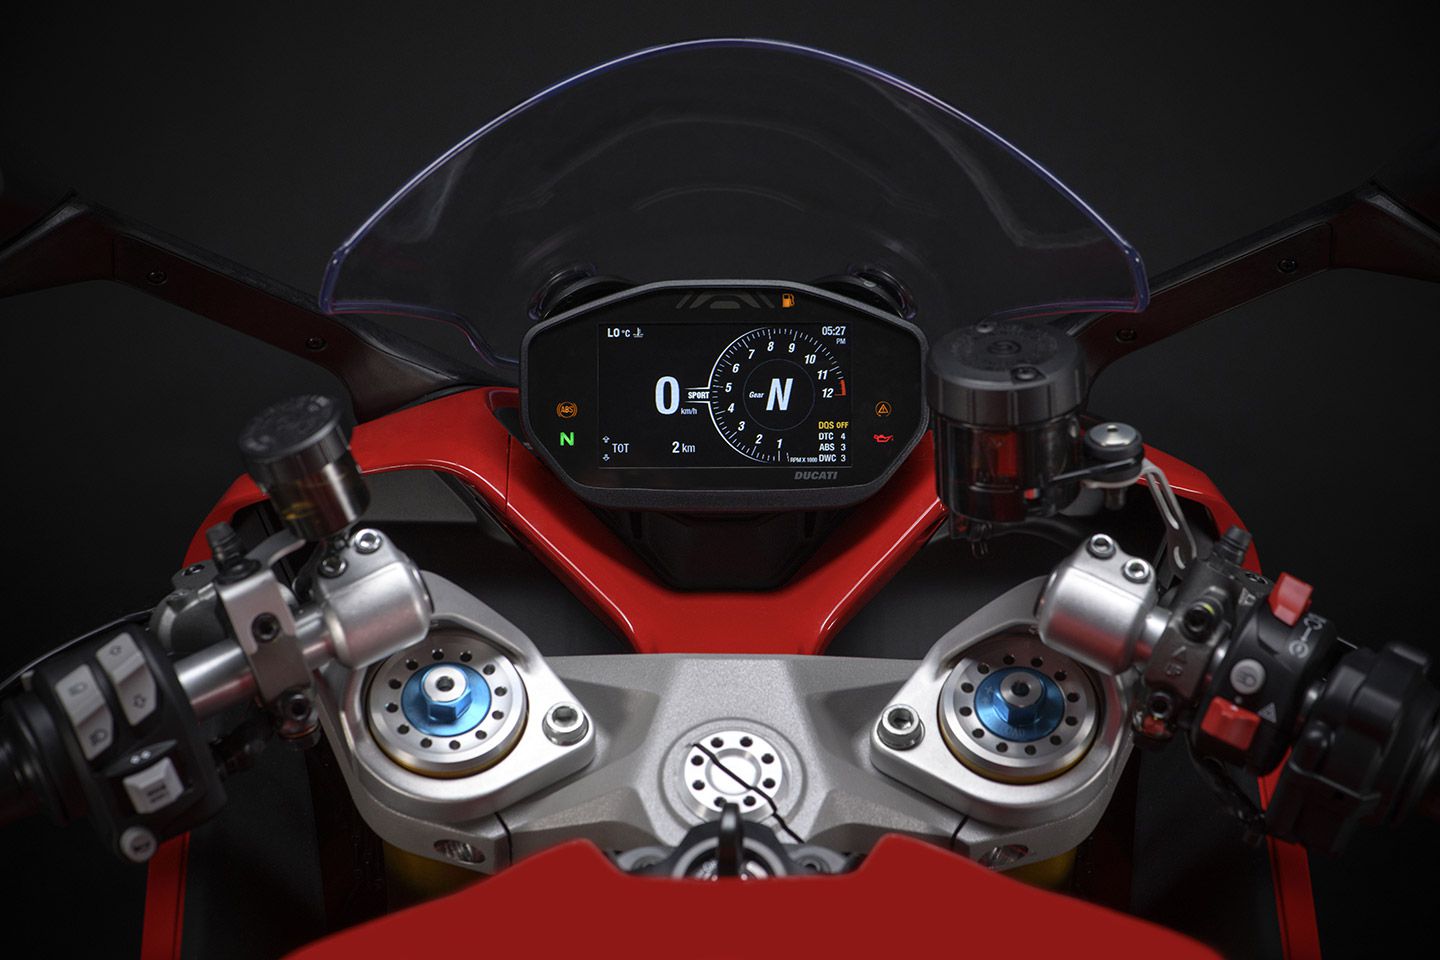 A 4.3-inch full-color TFT display was added in 2021. Notice the riser clamps for the clip-on handlebars. The windscreen is two-position adjustable.